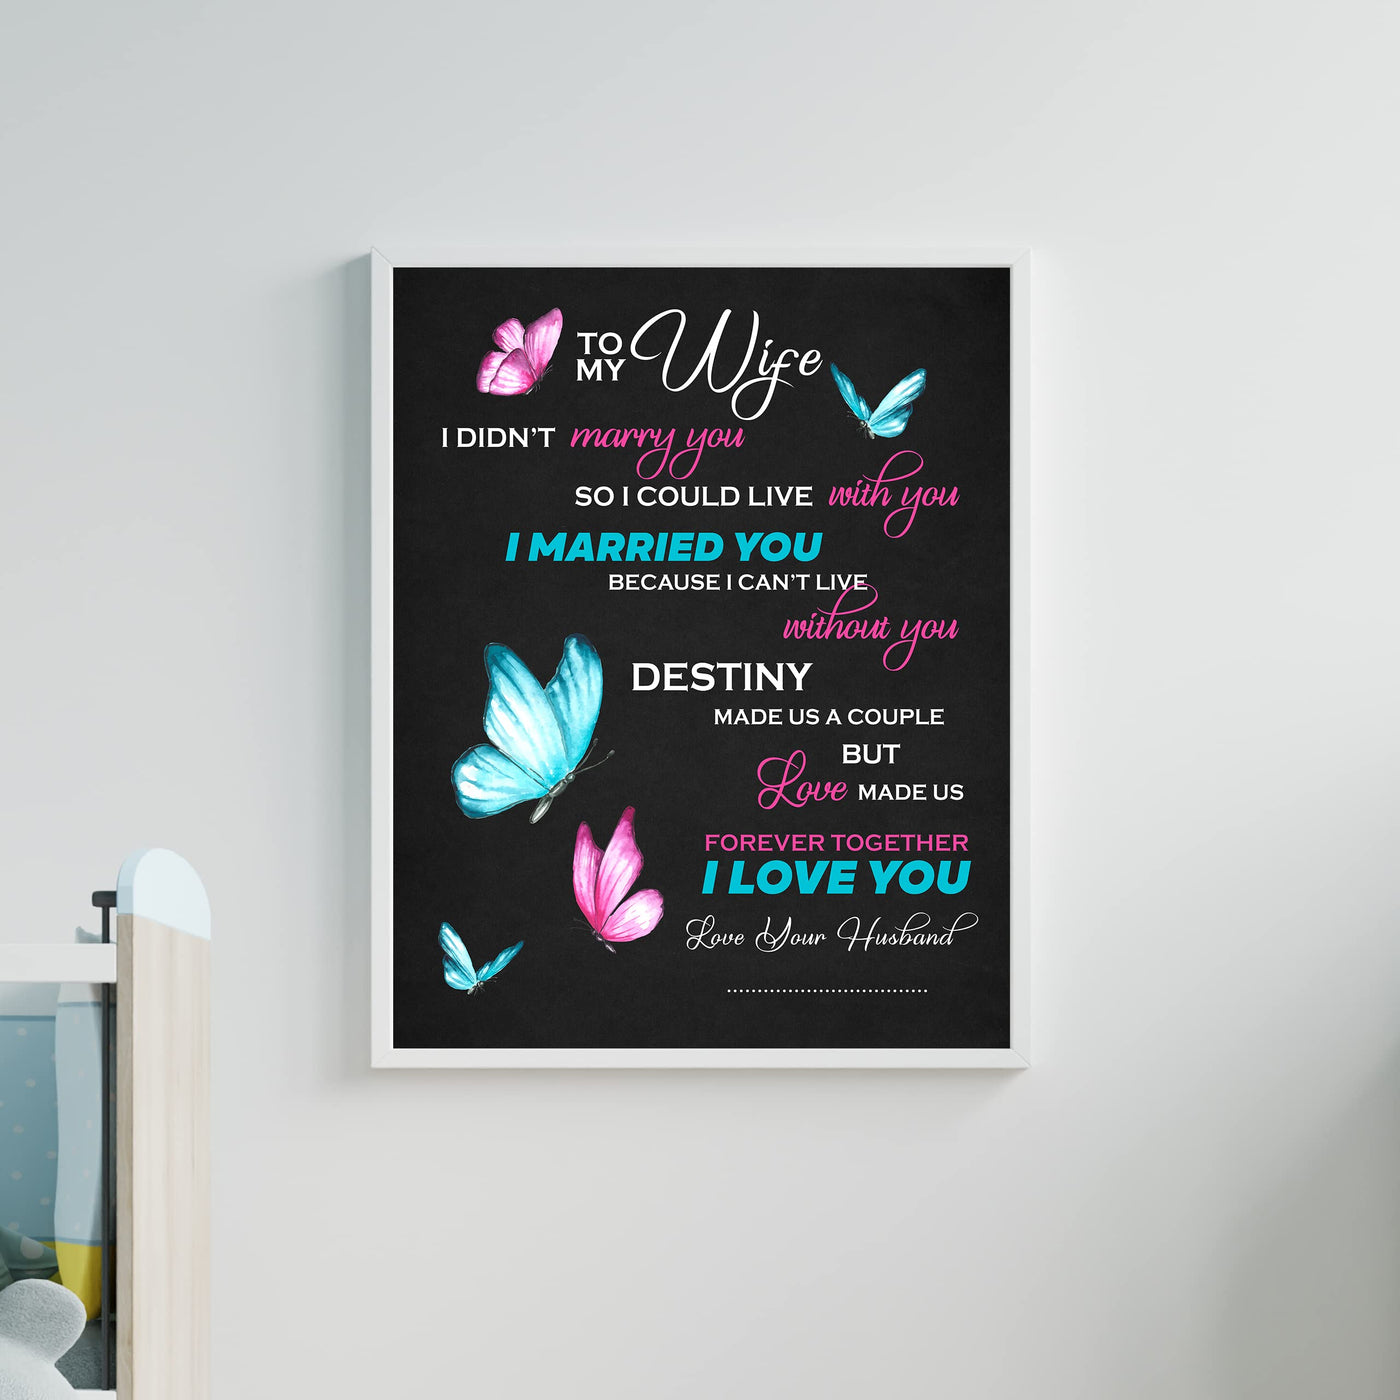 To My Wife -Together Forever -Your Husband Inspirational Quotes Wall Art Decor -11 x 14" Love & Marriage Poster Print w/Butterfly Images -Ready to Frame. Romantic Wedding & Anniversary Gift!